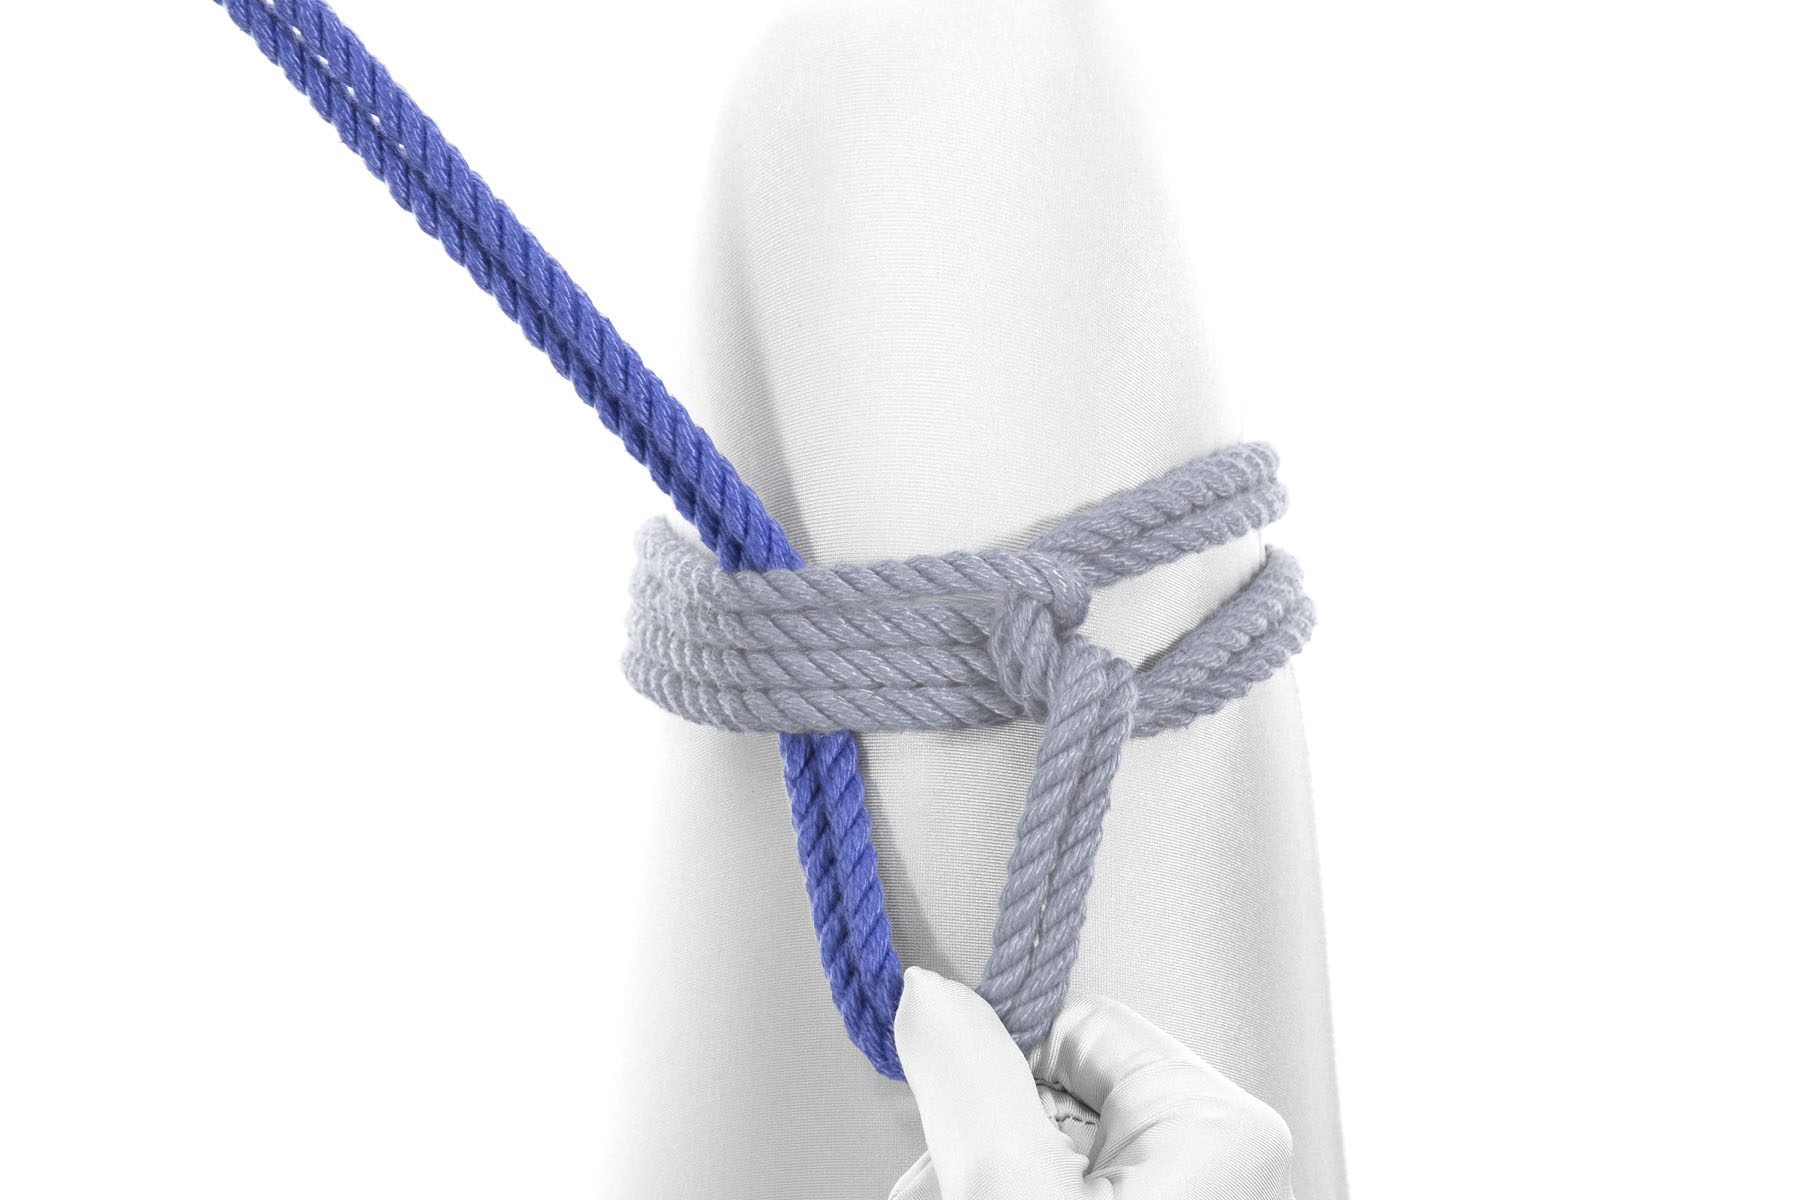 Continuing to pinch the rope with their right hand, the rigger has passed the working end under all four wraps. The rope continues to make a triangle pointing toward the body.